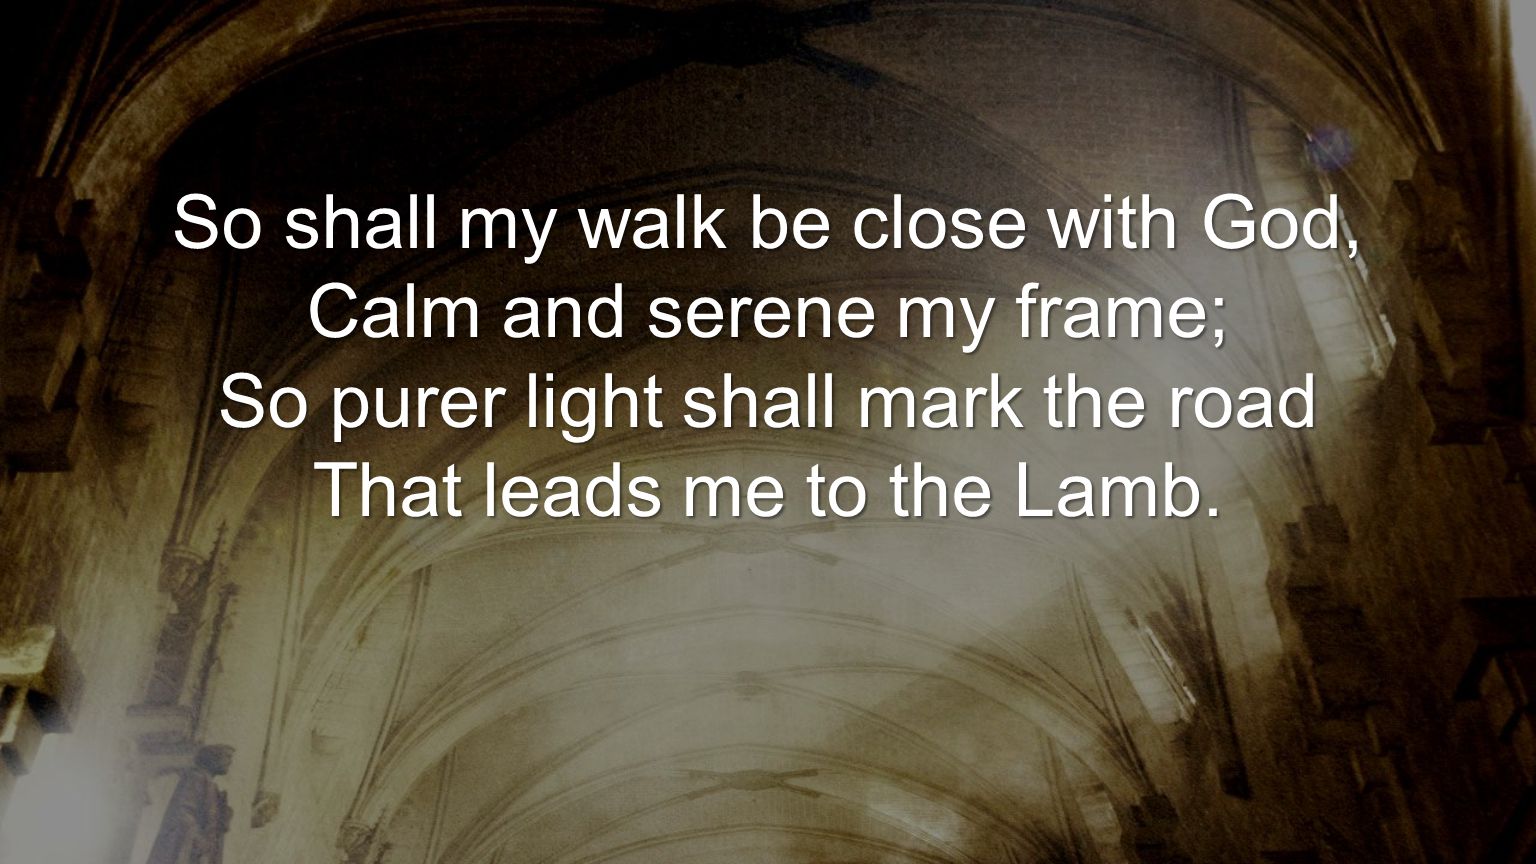 So shall my walk be close with God, Calm and serene my frame; So purer light shall mark the road That leads me to the Lamb.